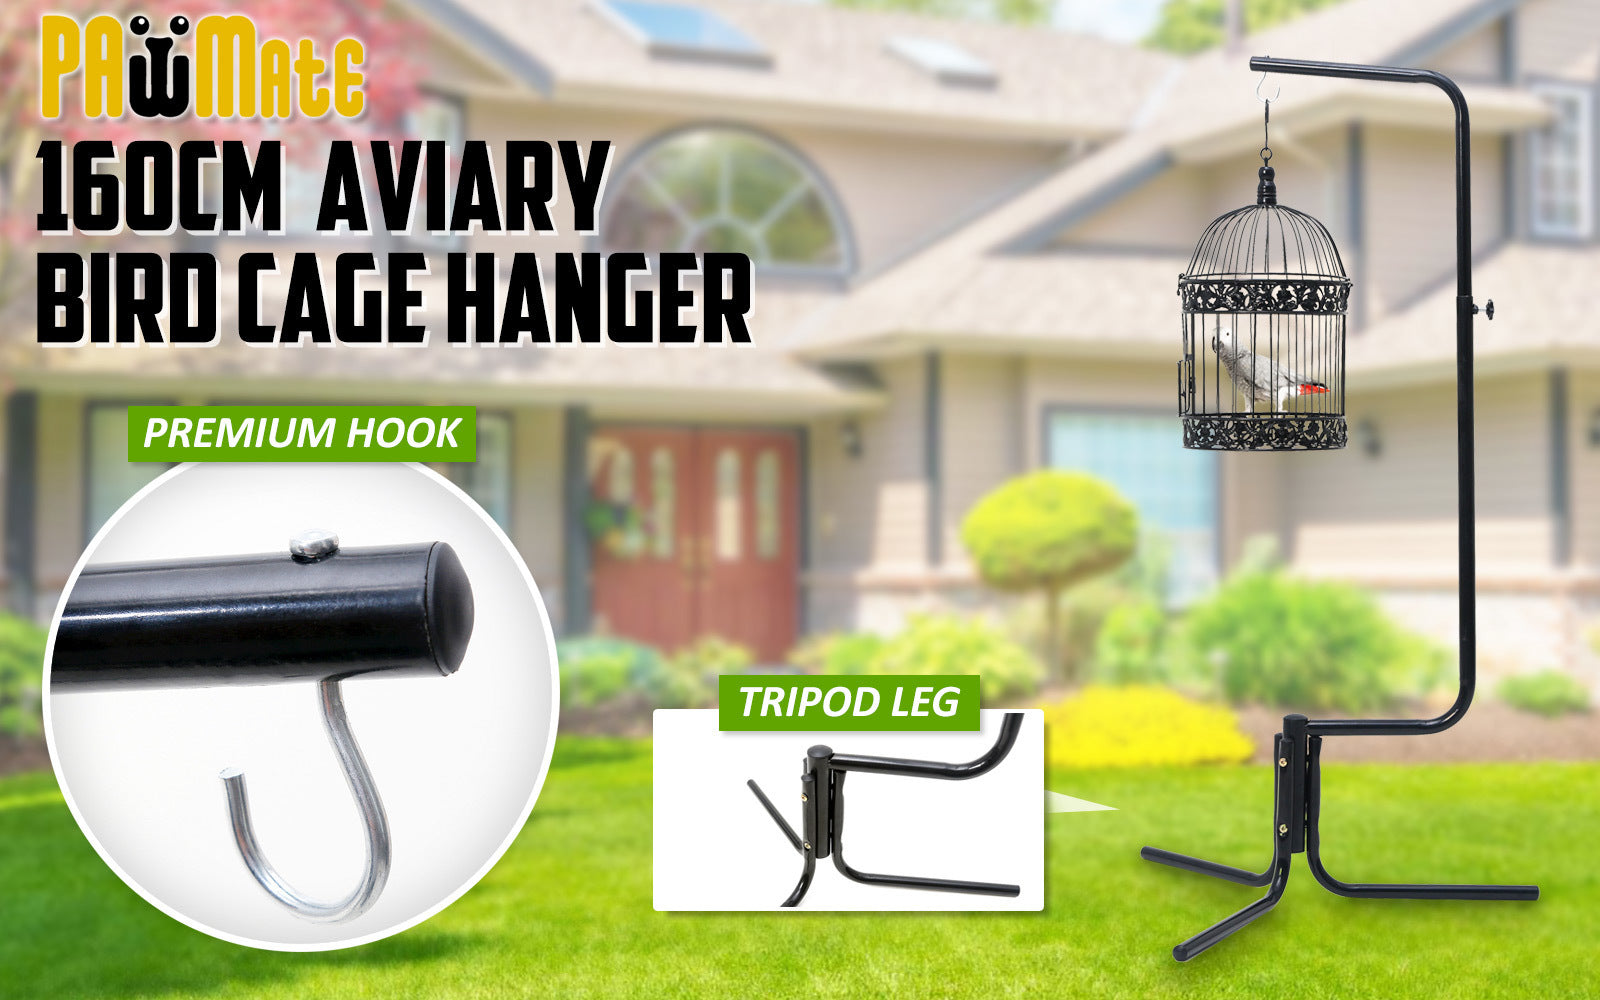 Bird Cage Hanger Stand Parrot Aviary Solo 160cm - image2